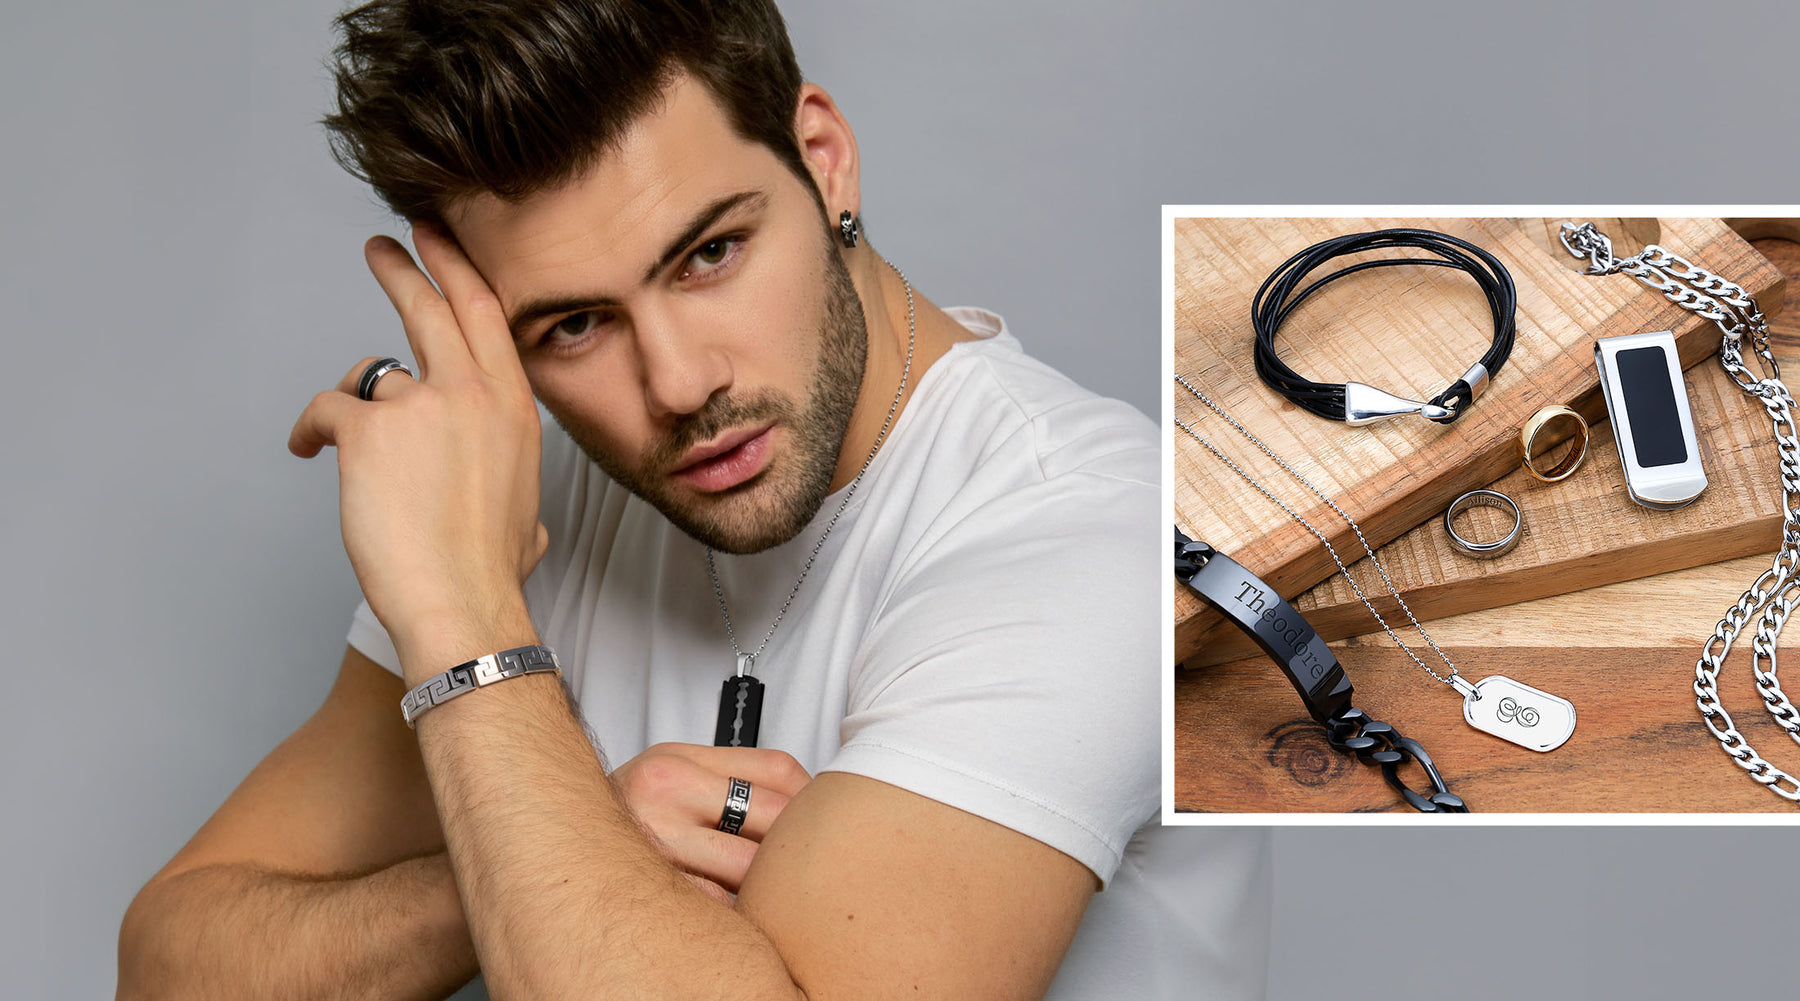 male model posing with jewelry